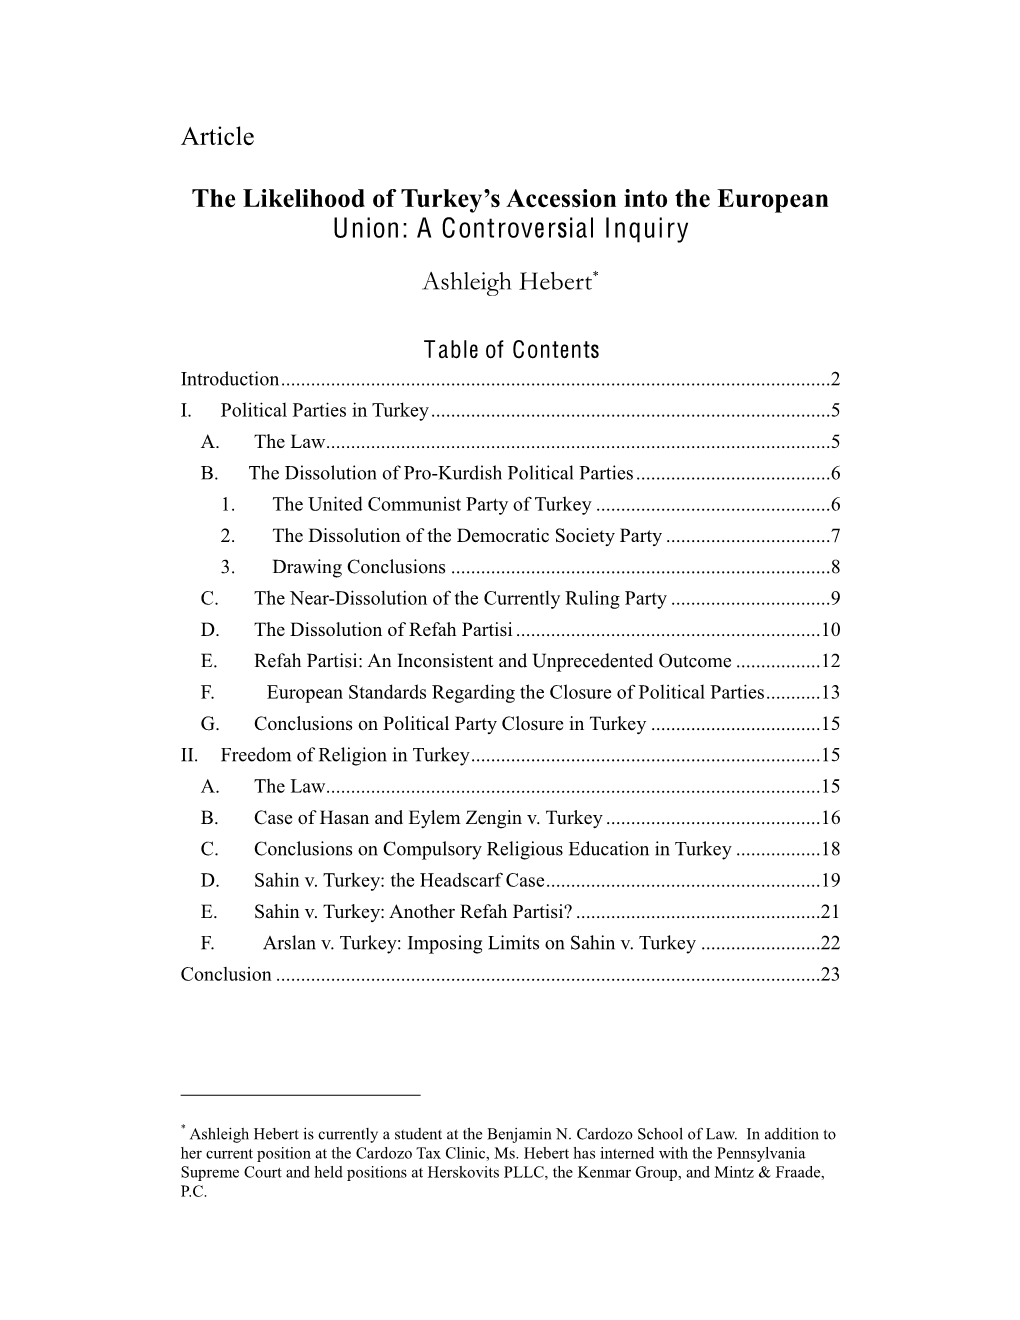 Article the Likelihood of Turkey's Accession Into the European Union: a Controversial Inquiry Ashleigh Hebert